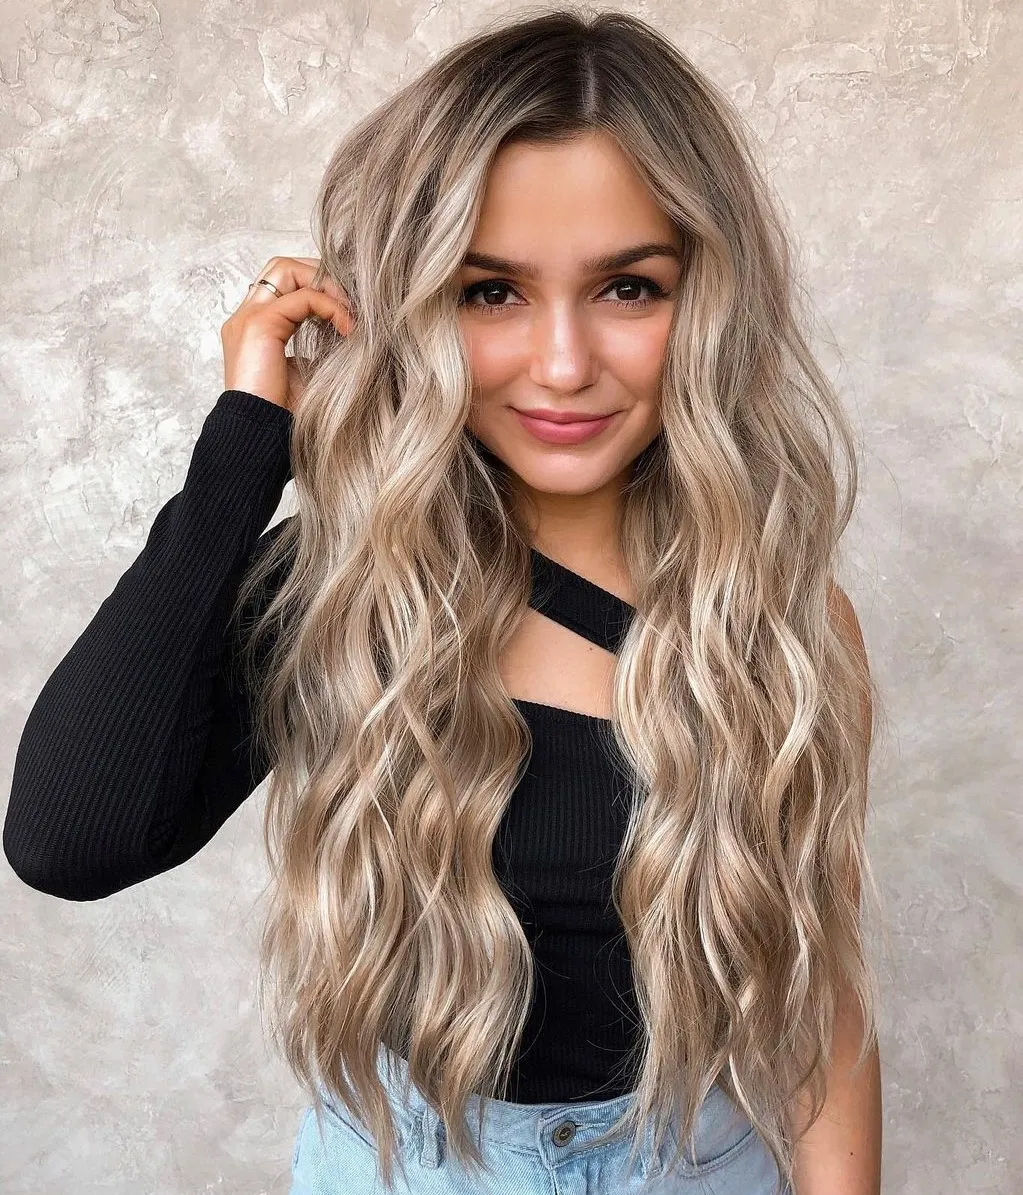 Top Latest Hairstyles For Girls With Long Hair In 2023 - Find Health Tips